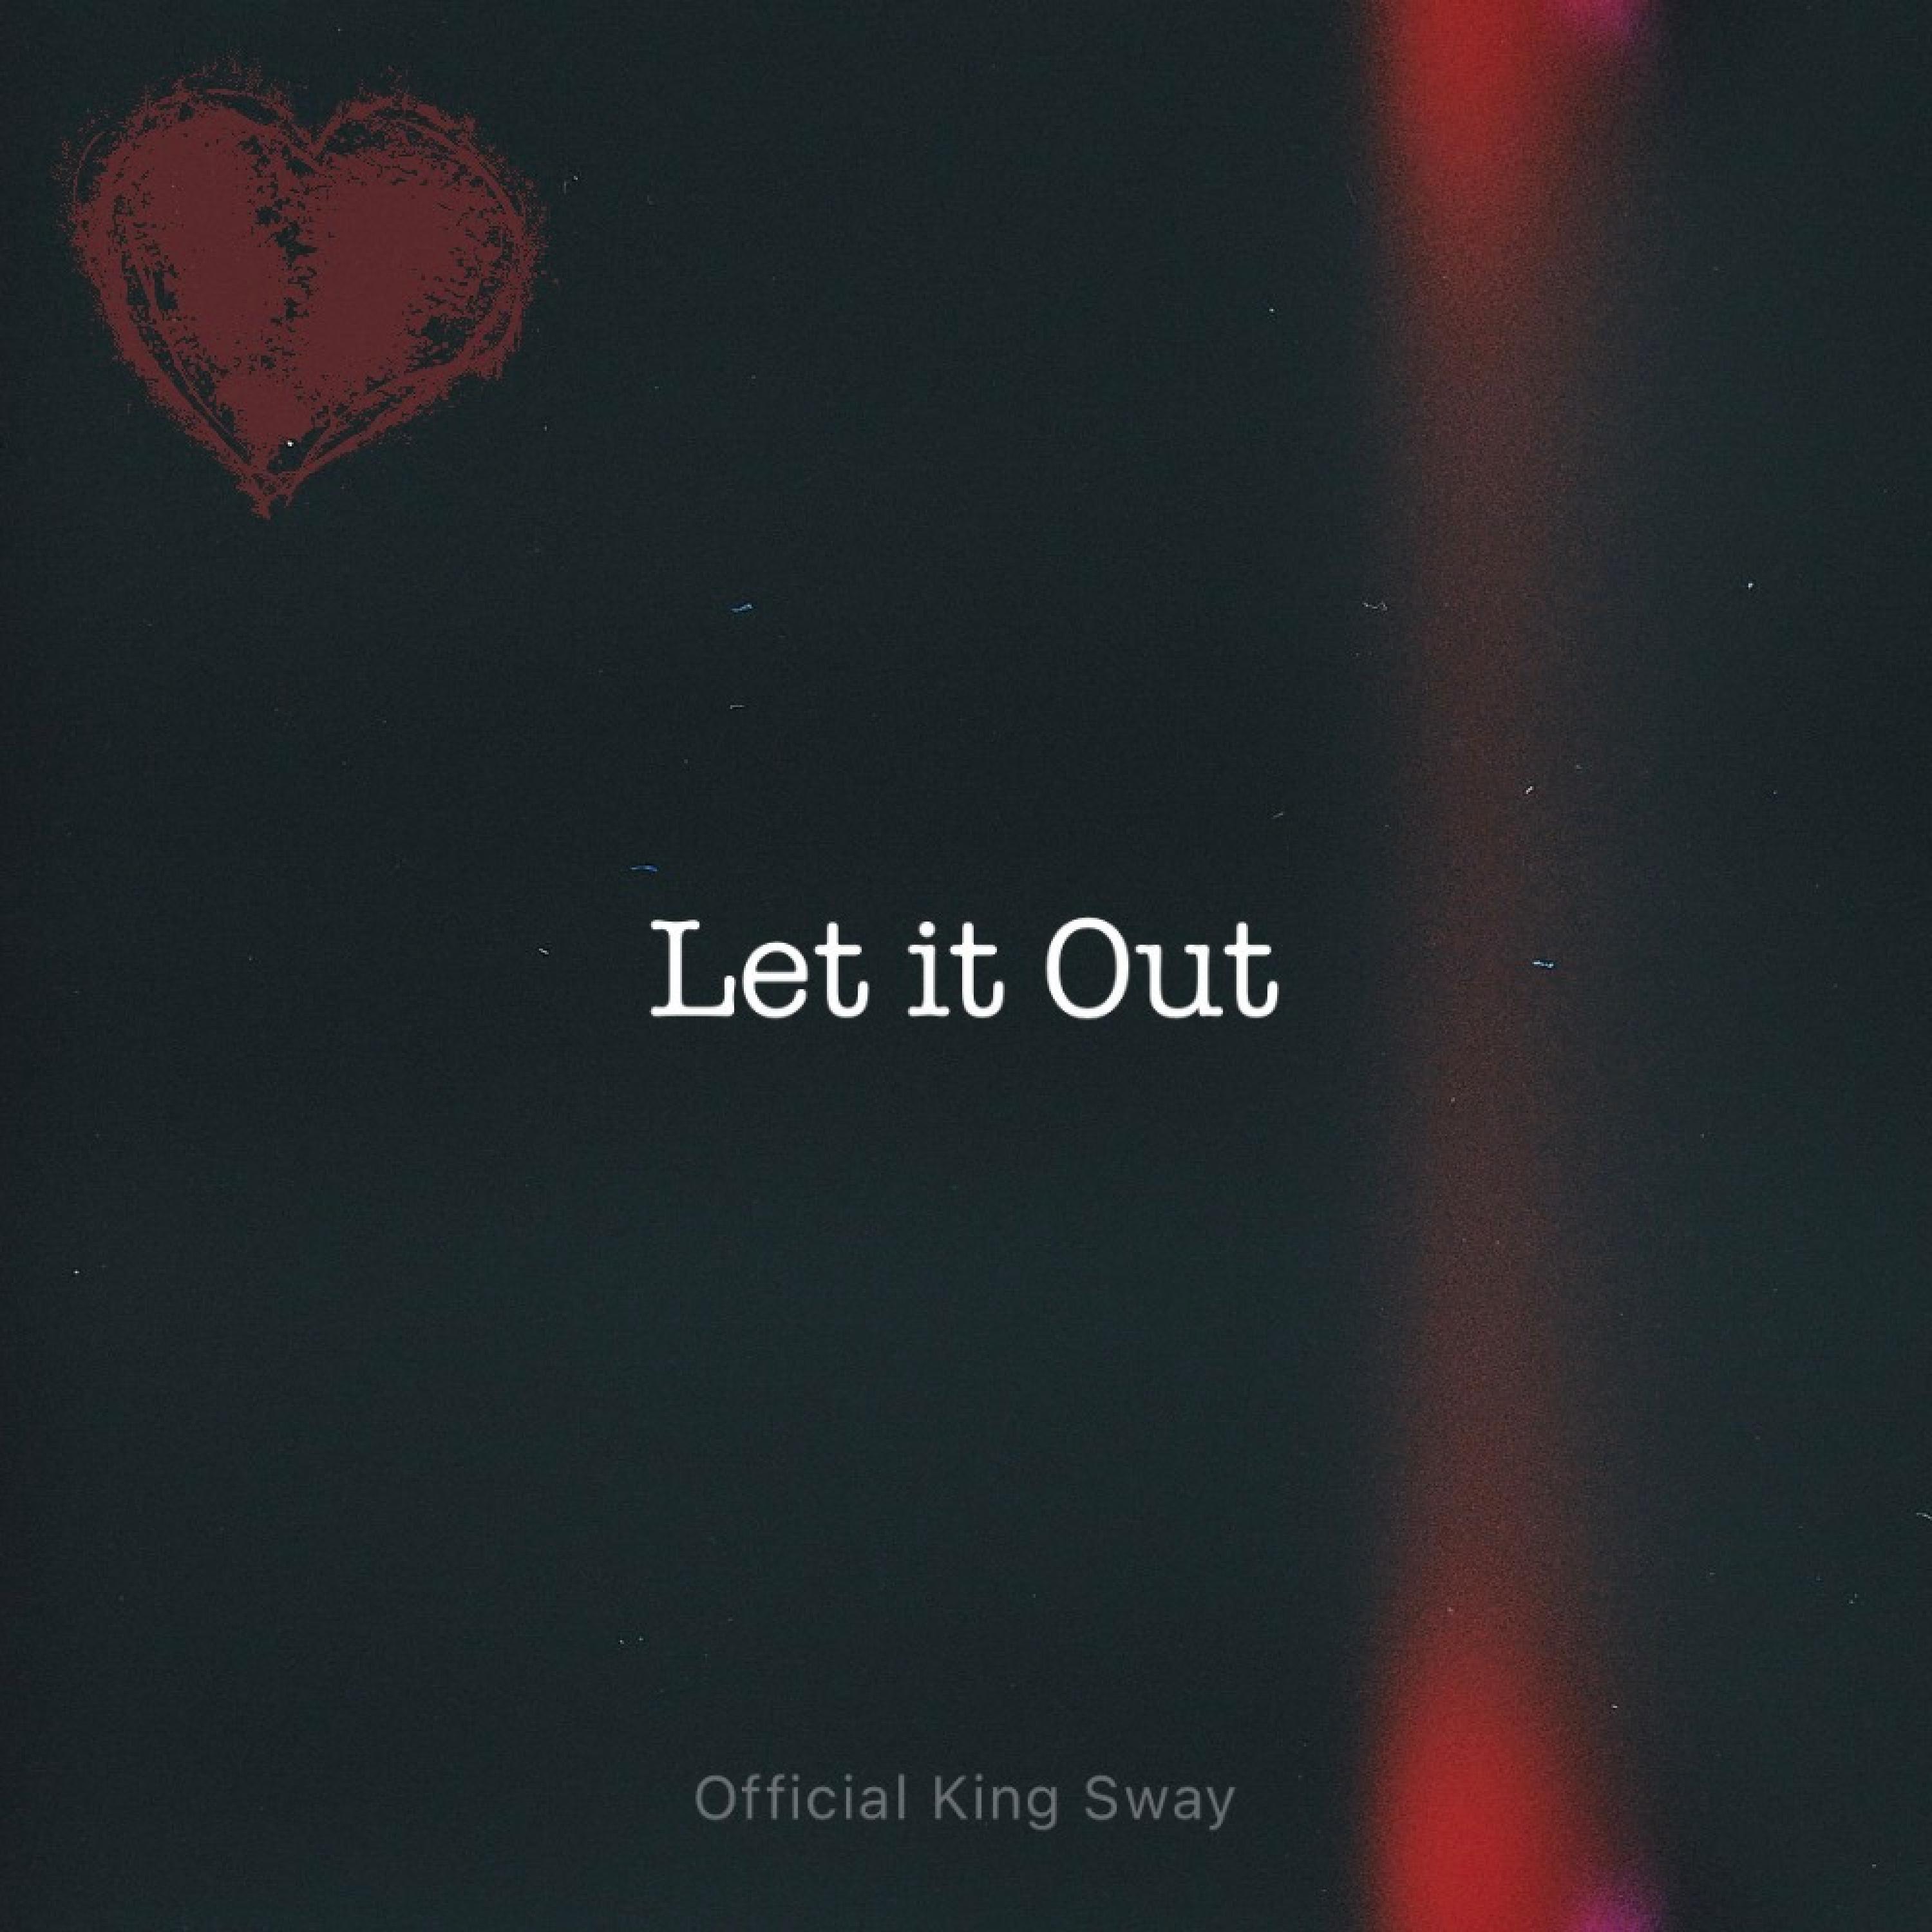 Official King Sway - Let it out